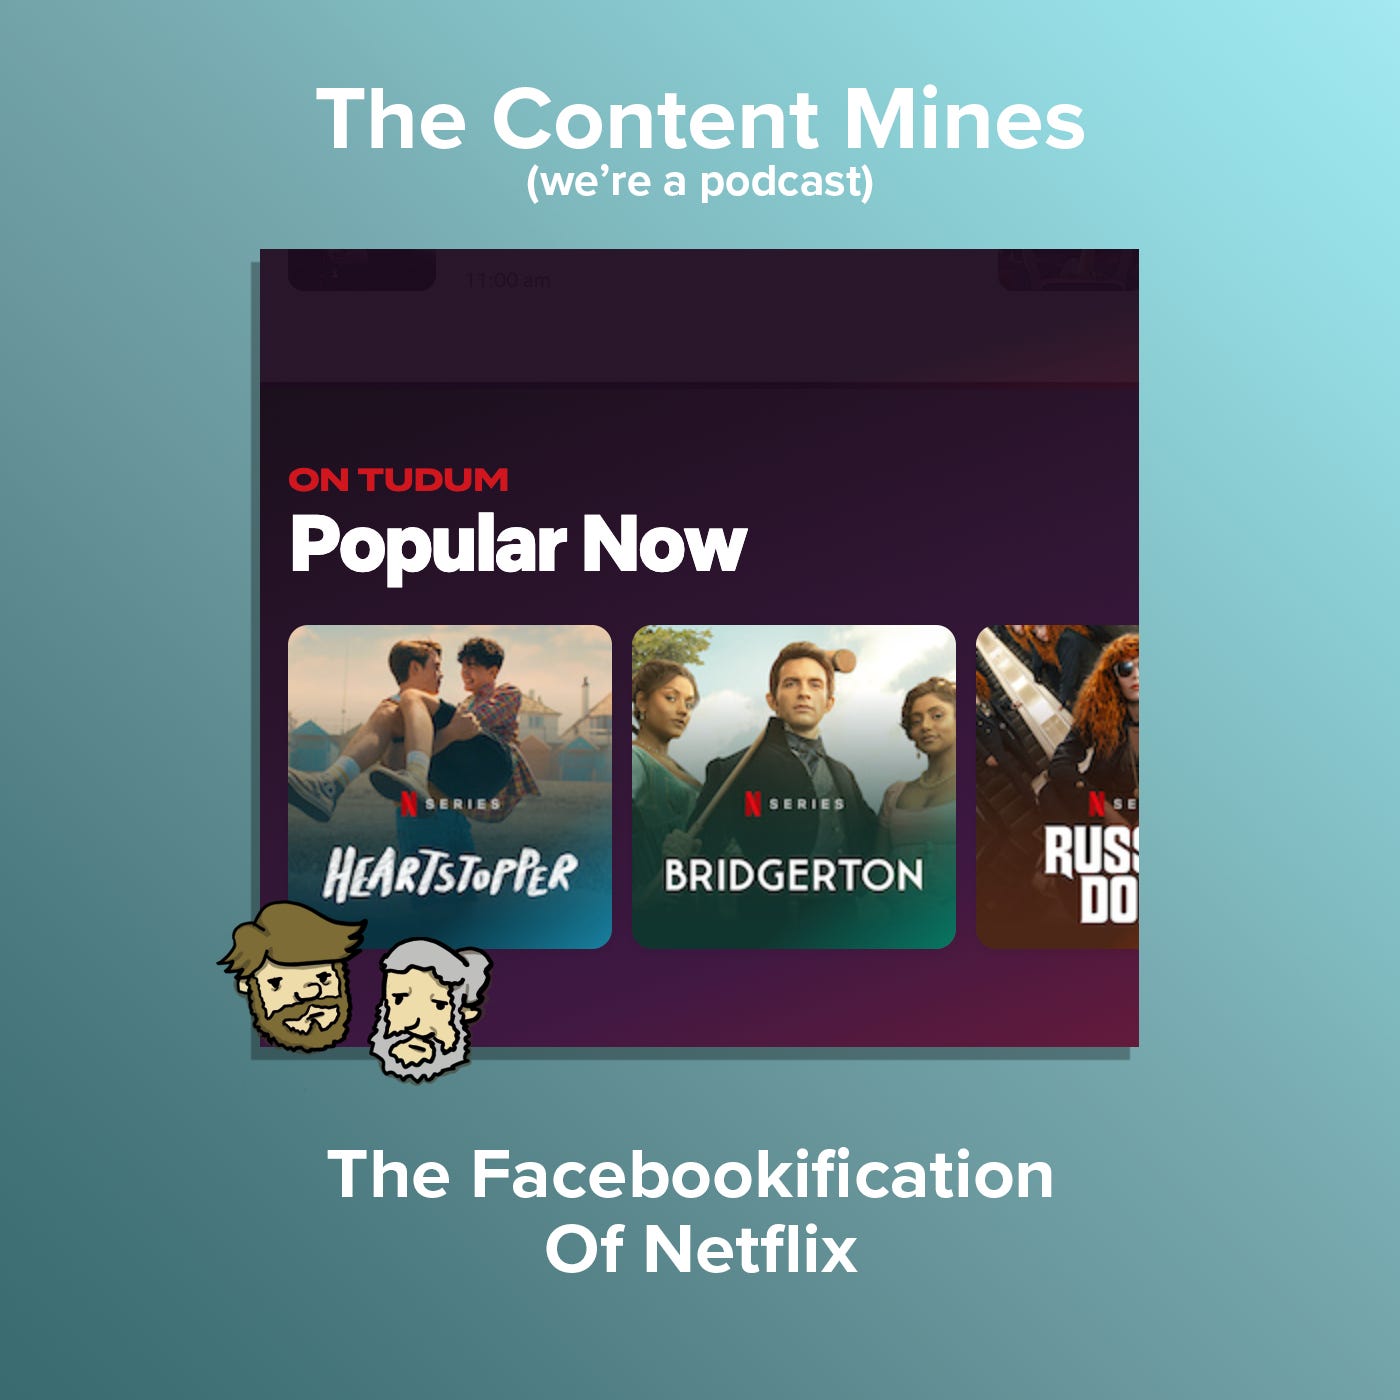 The Facebookification Of Netflix